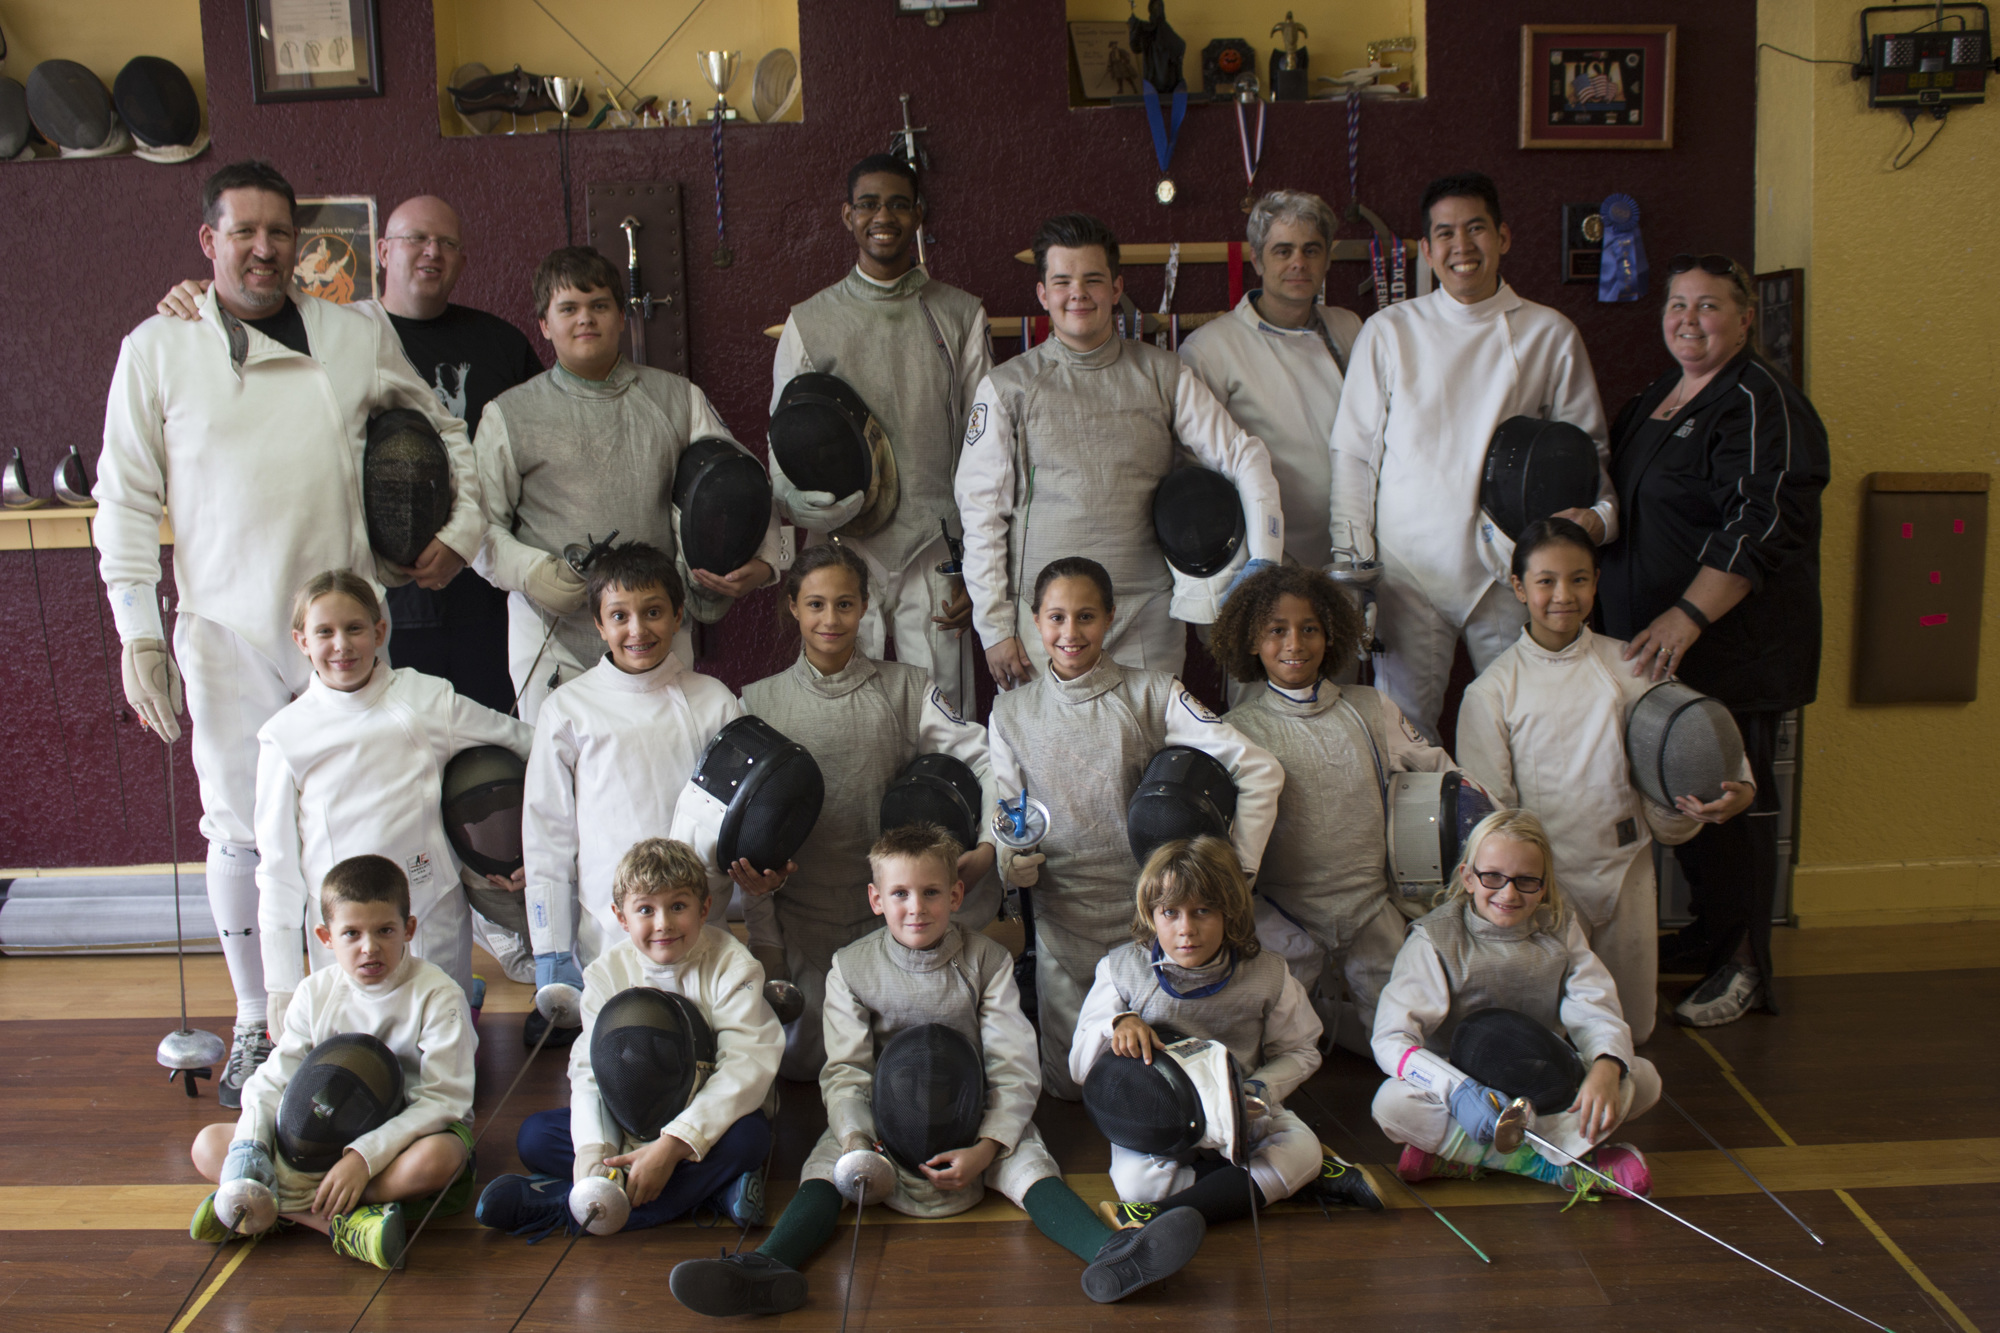 The Winter Garden Fencing Academy has recently been recognized for a Club Of Excellence award from USA Fencing.